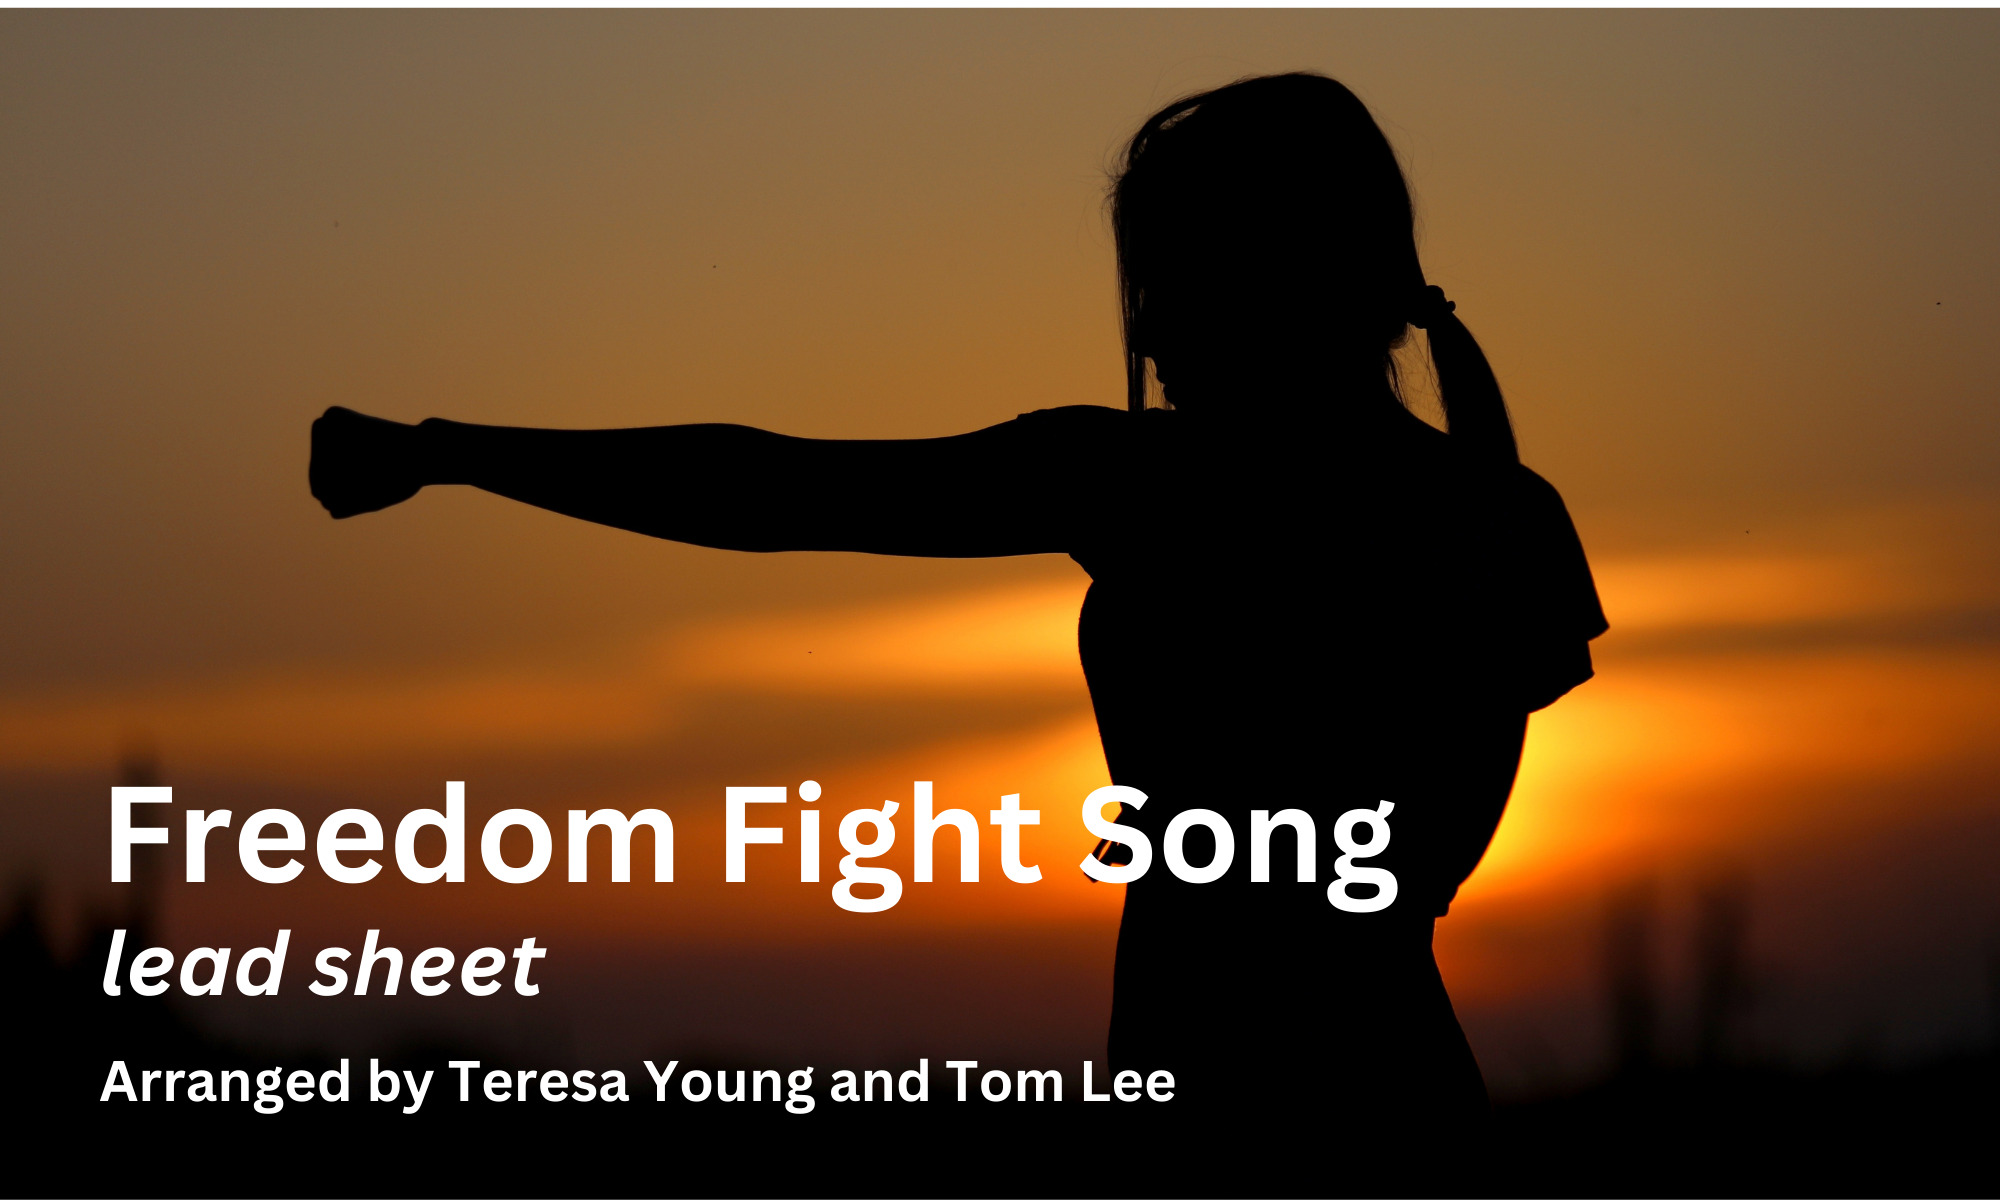 Freedom Fight Song, by Teresa Young and Tom Lee